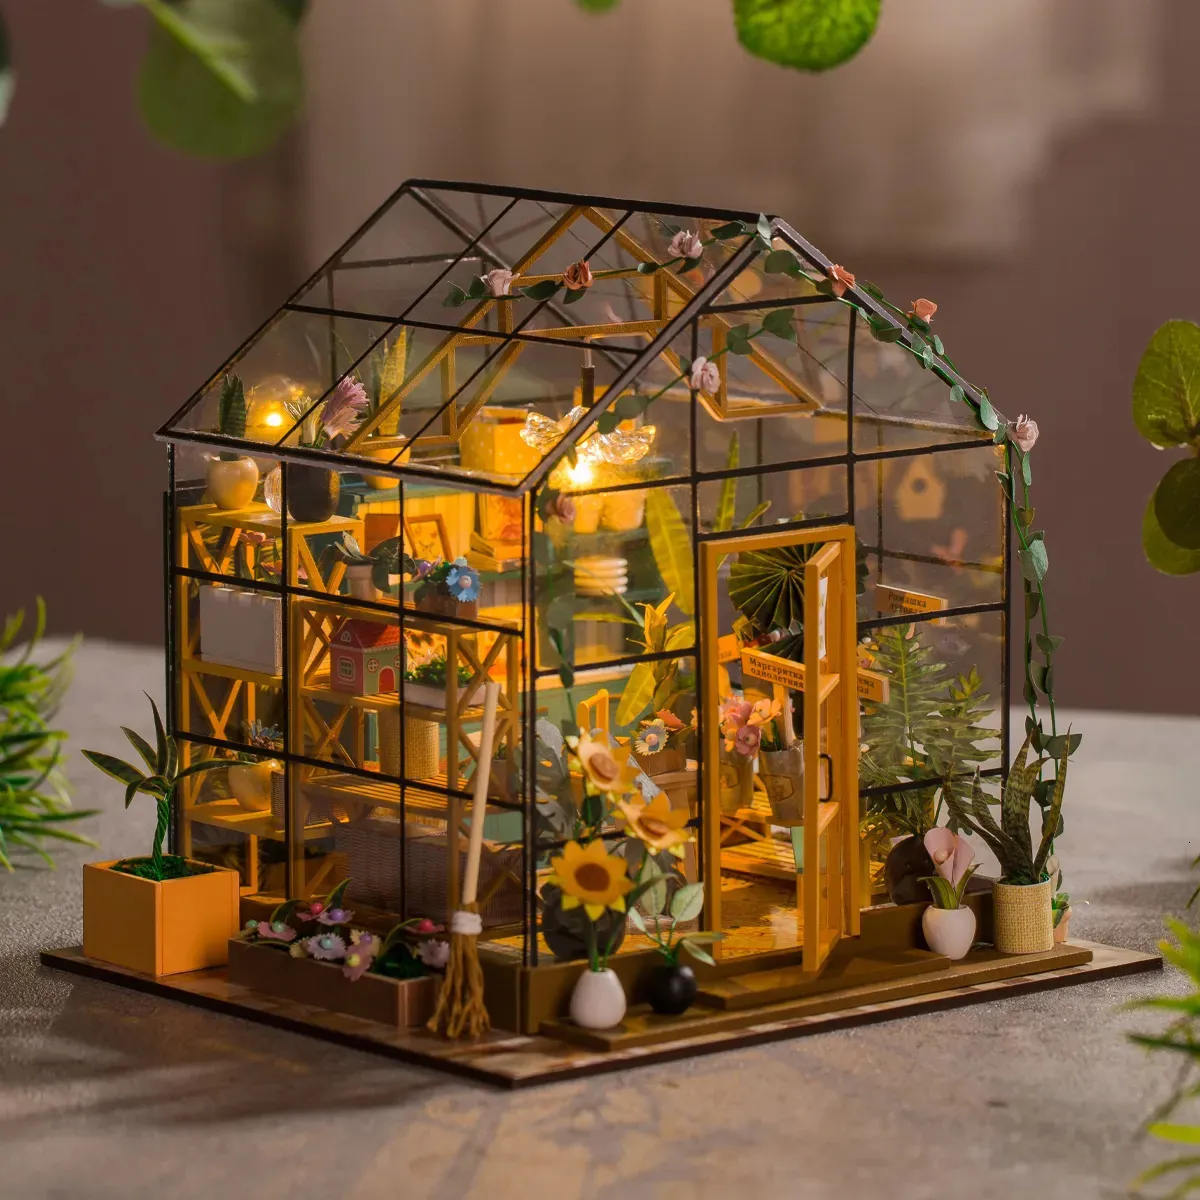 Doll House Accessories Baby House Kit Mini DIY Flower House Handmade 3D Puzzle Assembly Building Model Toys Home Bedroom Decoration with Furniture Wo 231114